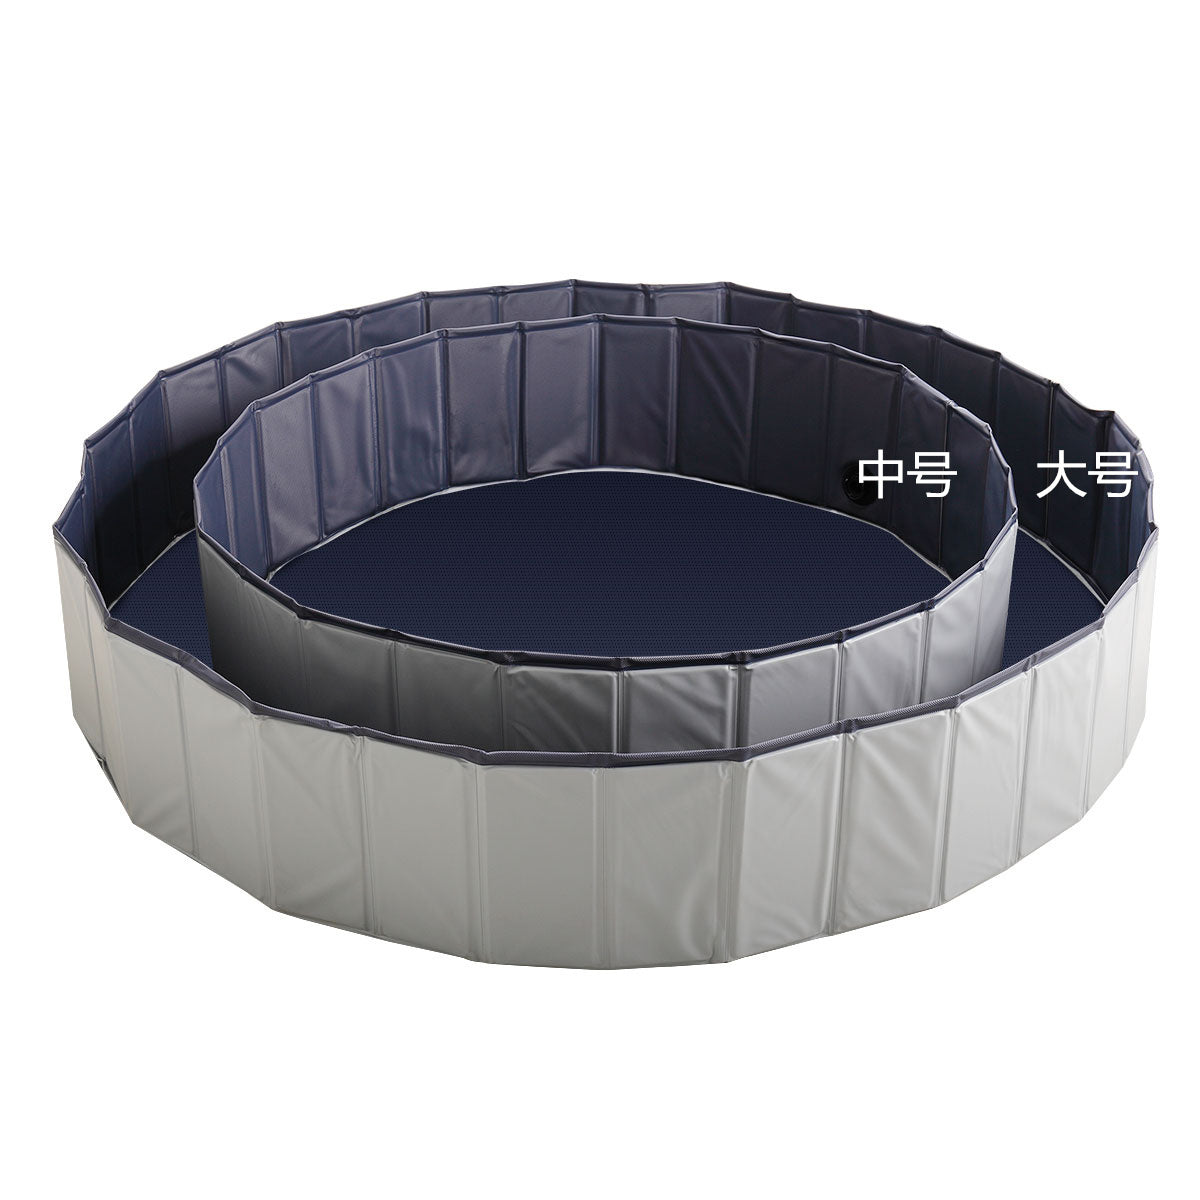 Foldable Pet Bath Pool, Collapsible Dog Bathing Tub, Kiddie and Toy Pool for Dogs Cats and Kids